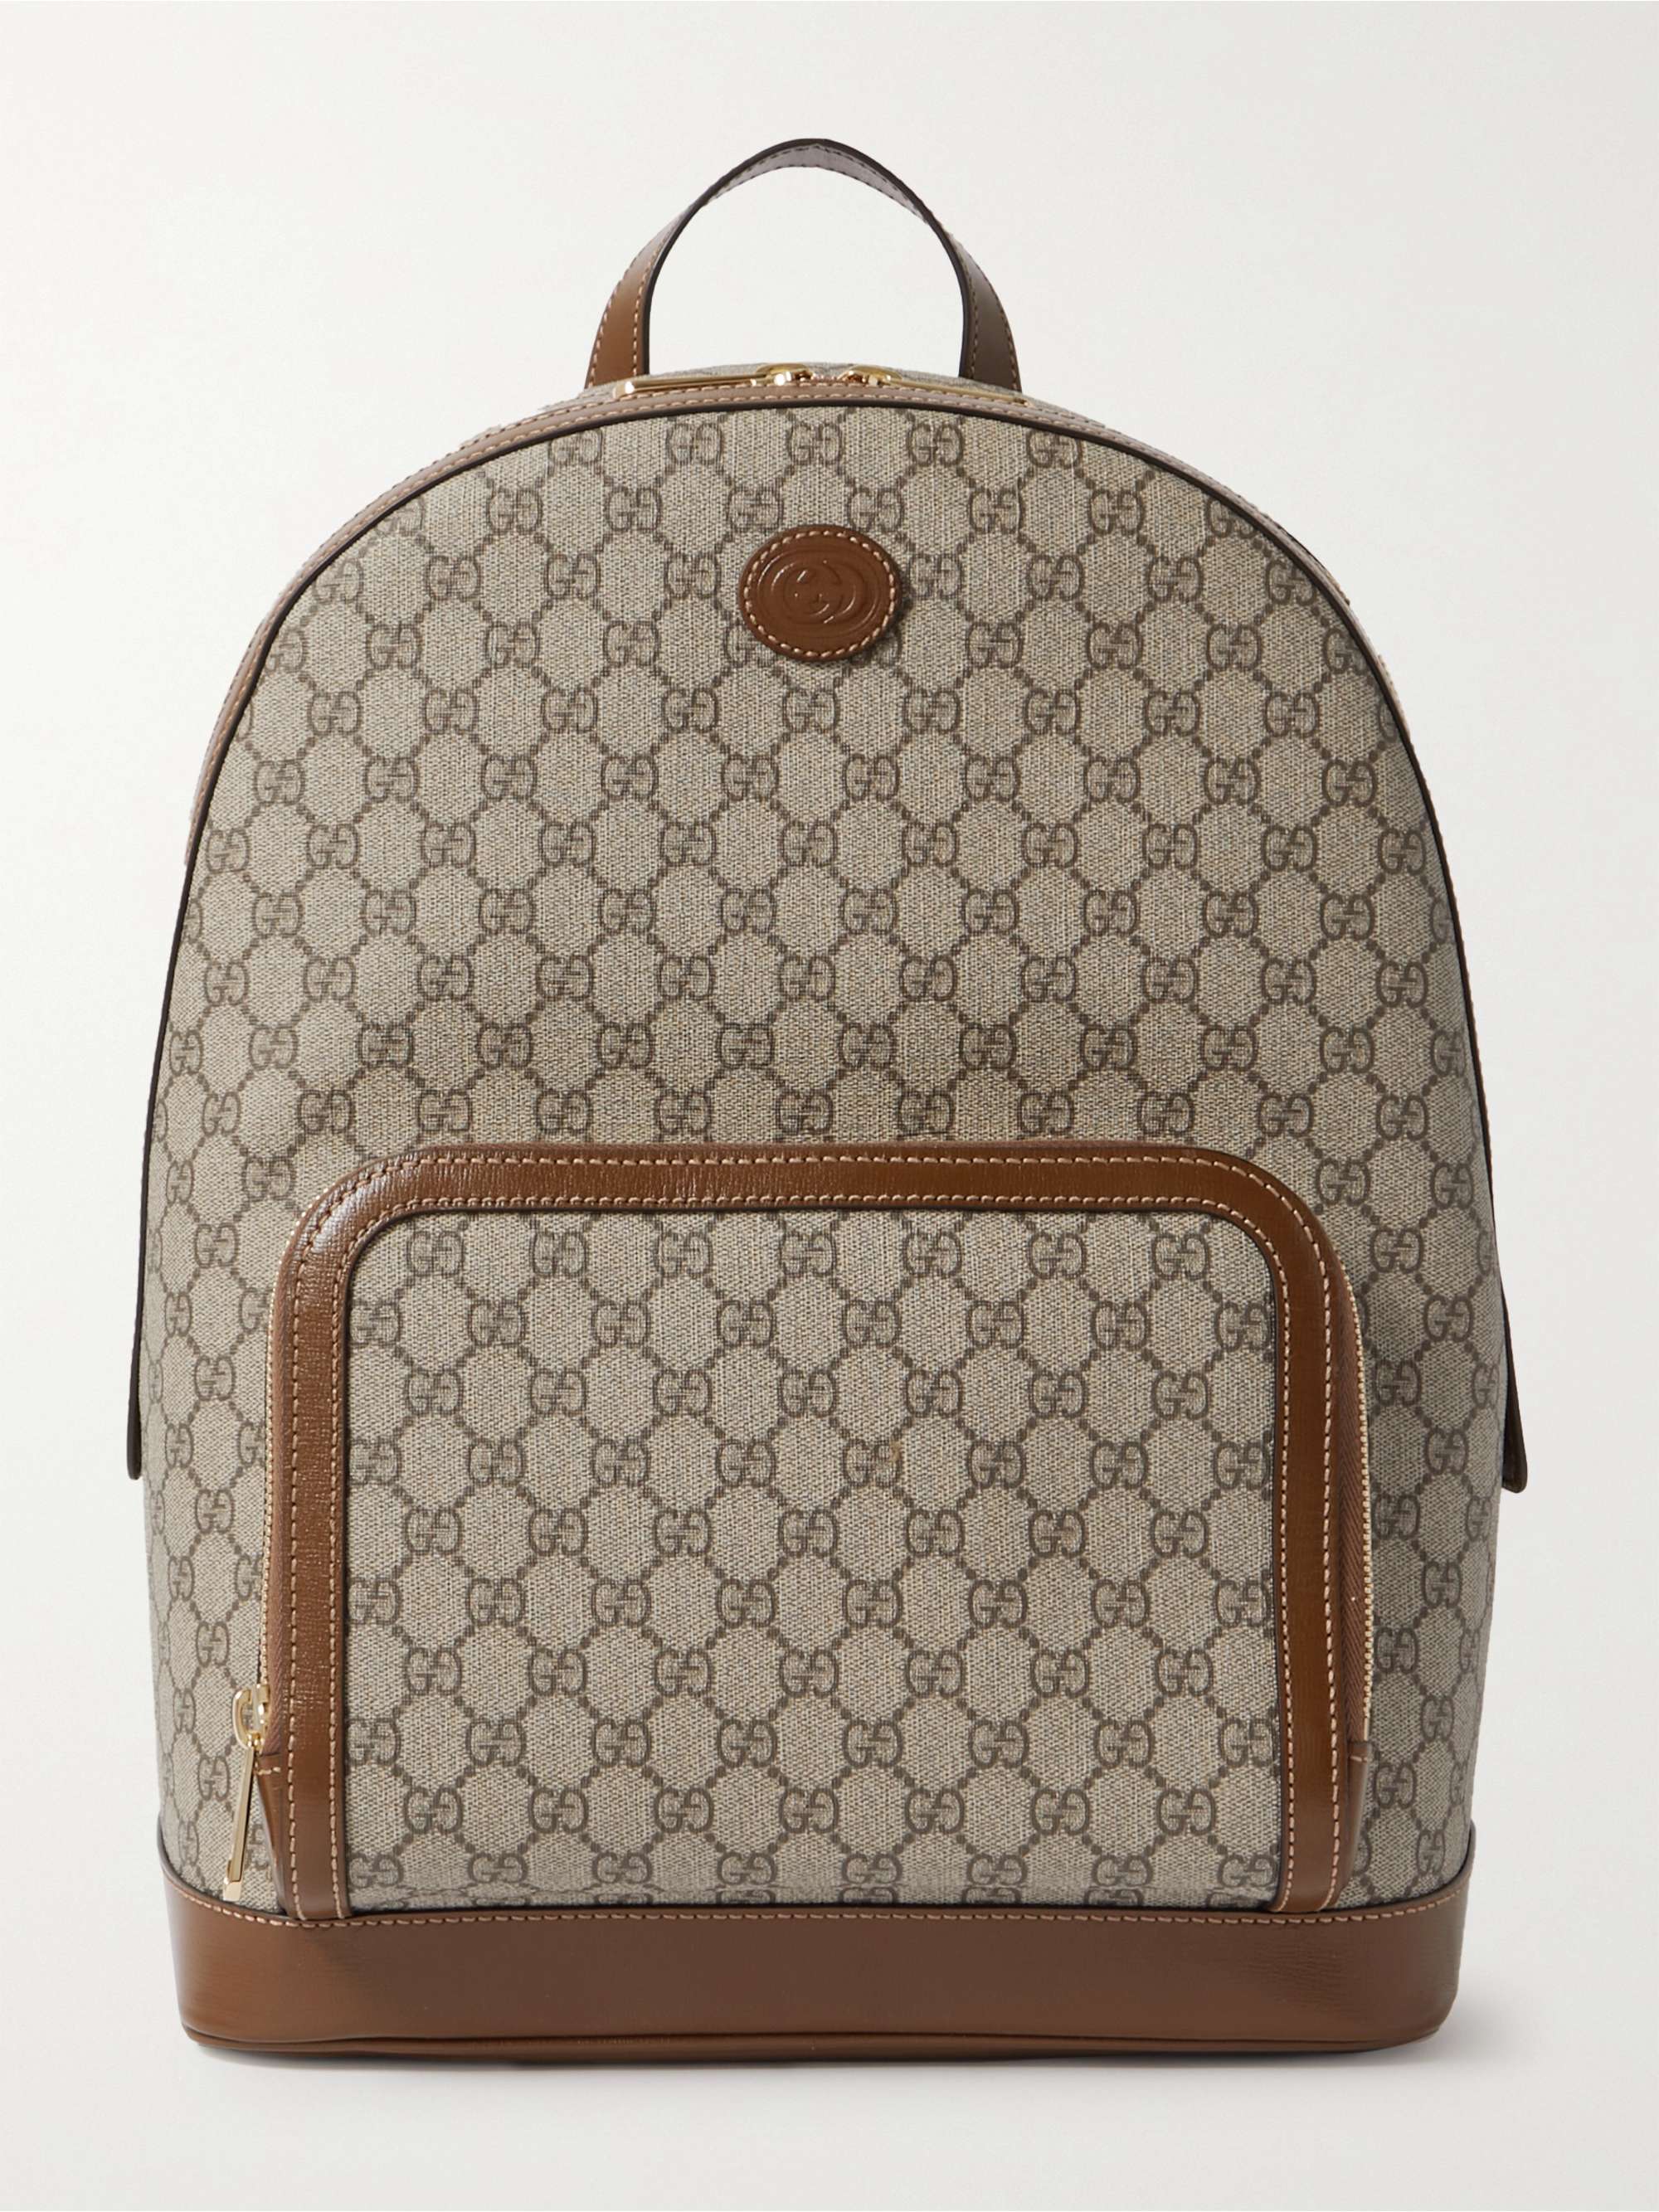 GUCCI Bags for Men